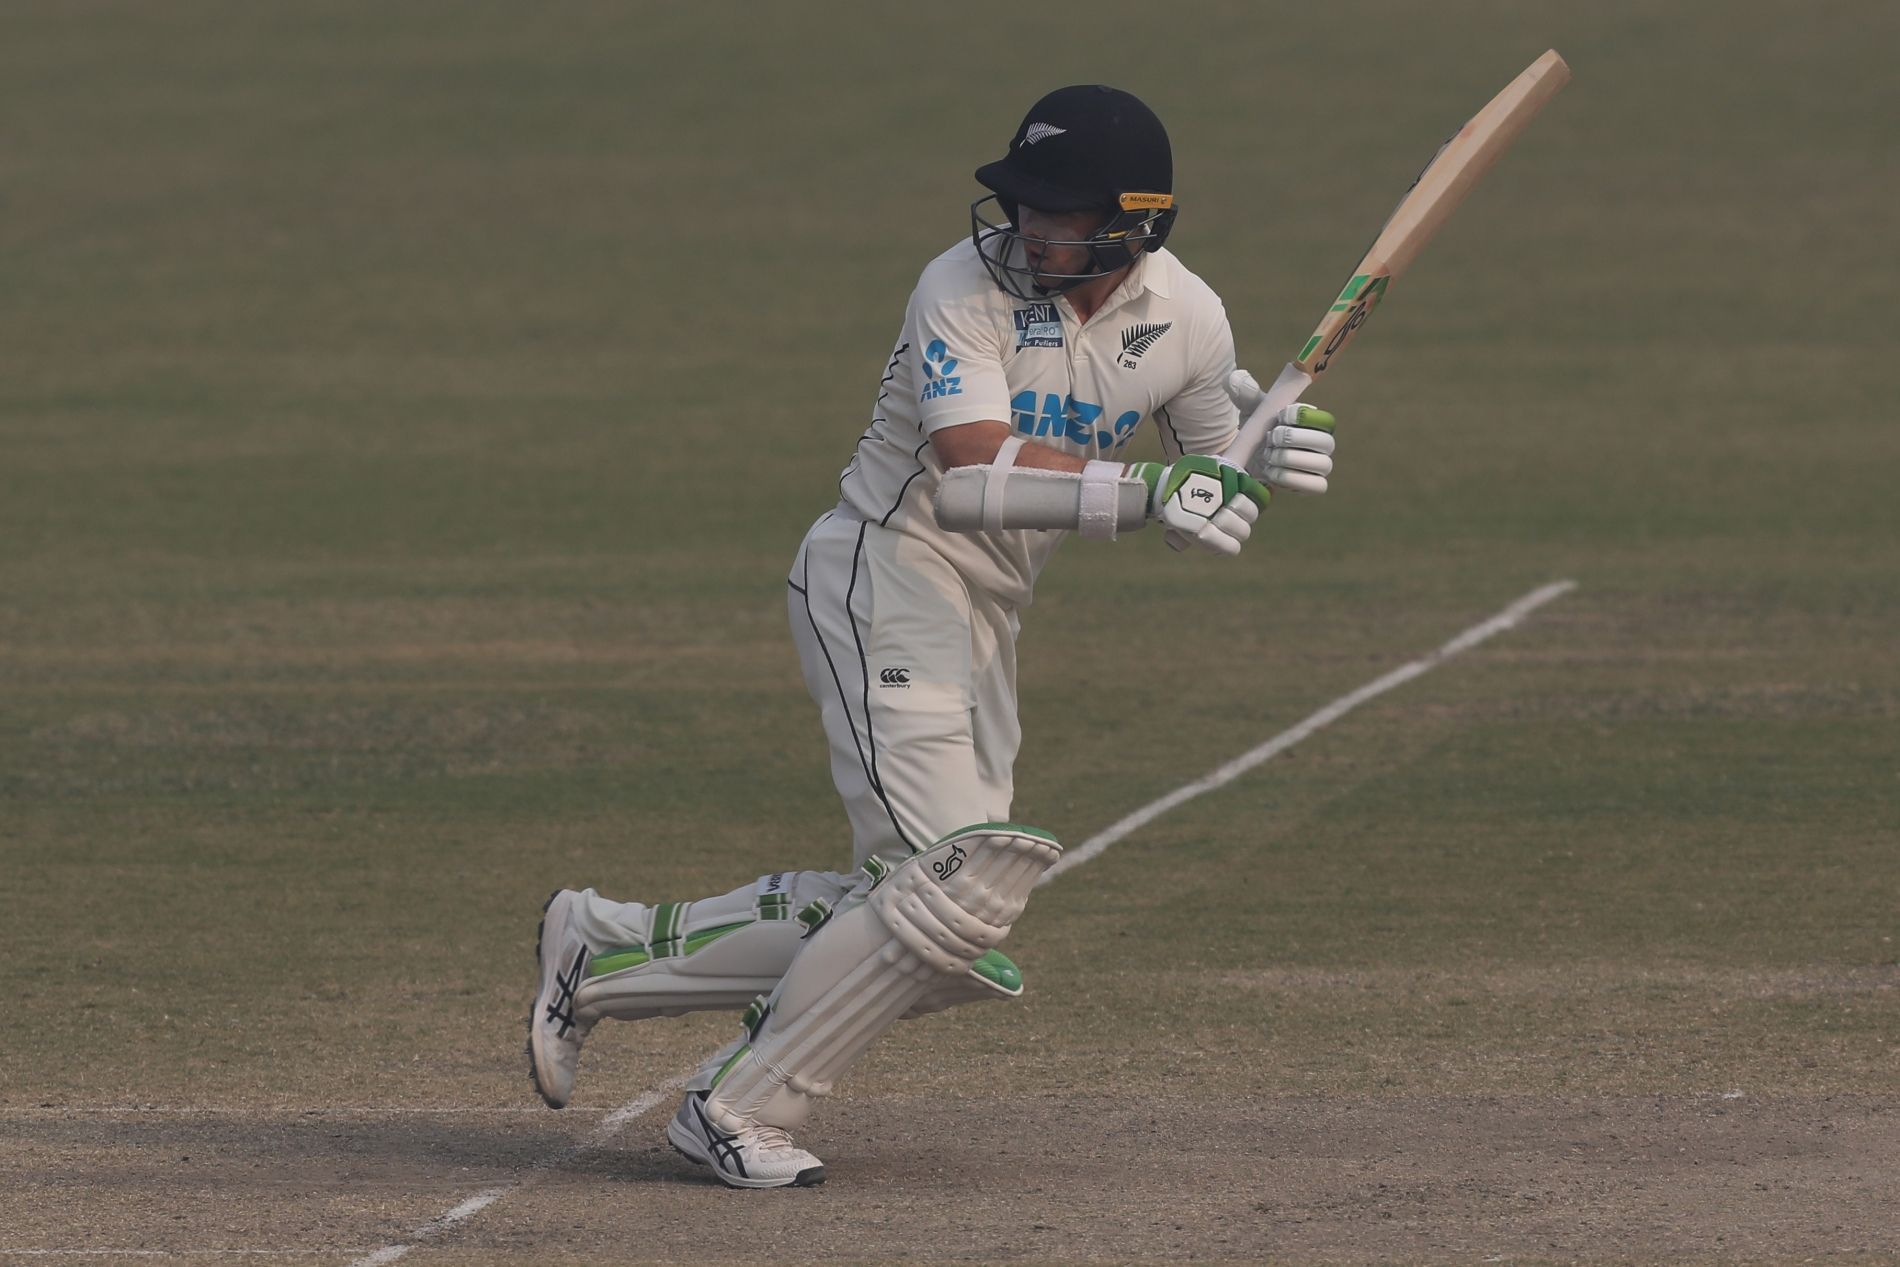 New Zealand opener Tom Latham contributed a hard-fought fifty. Pic: ICC